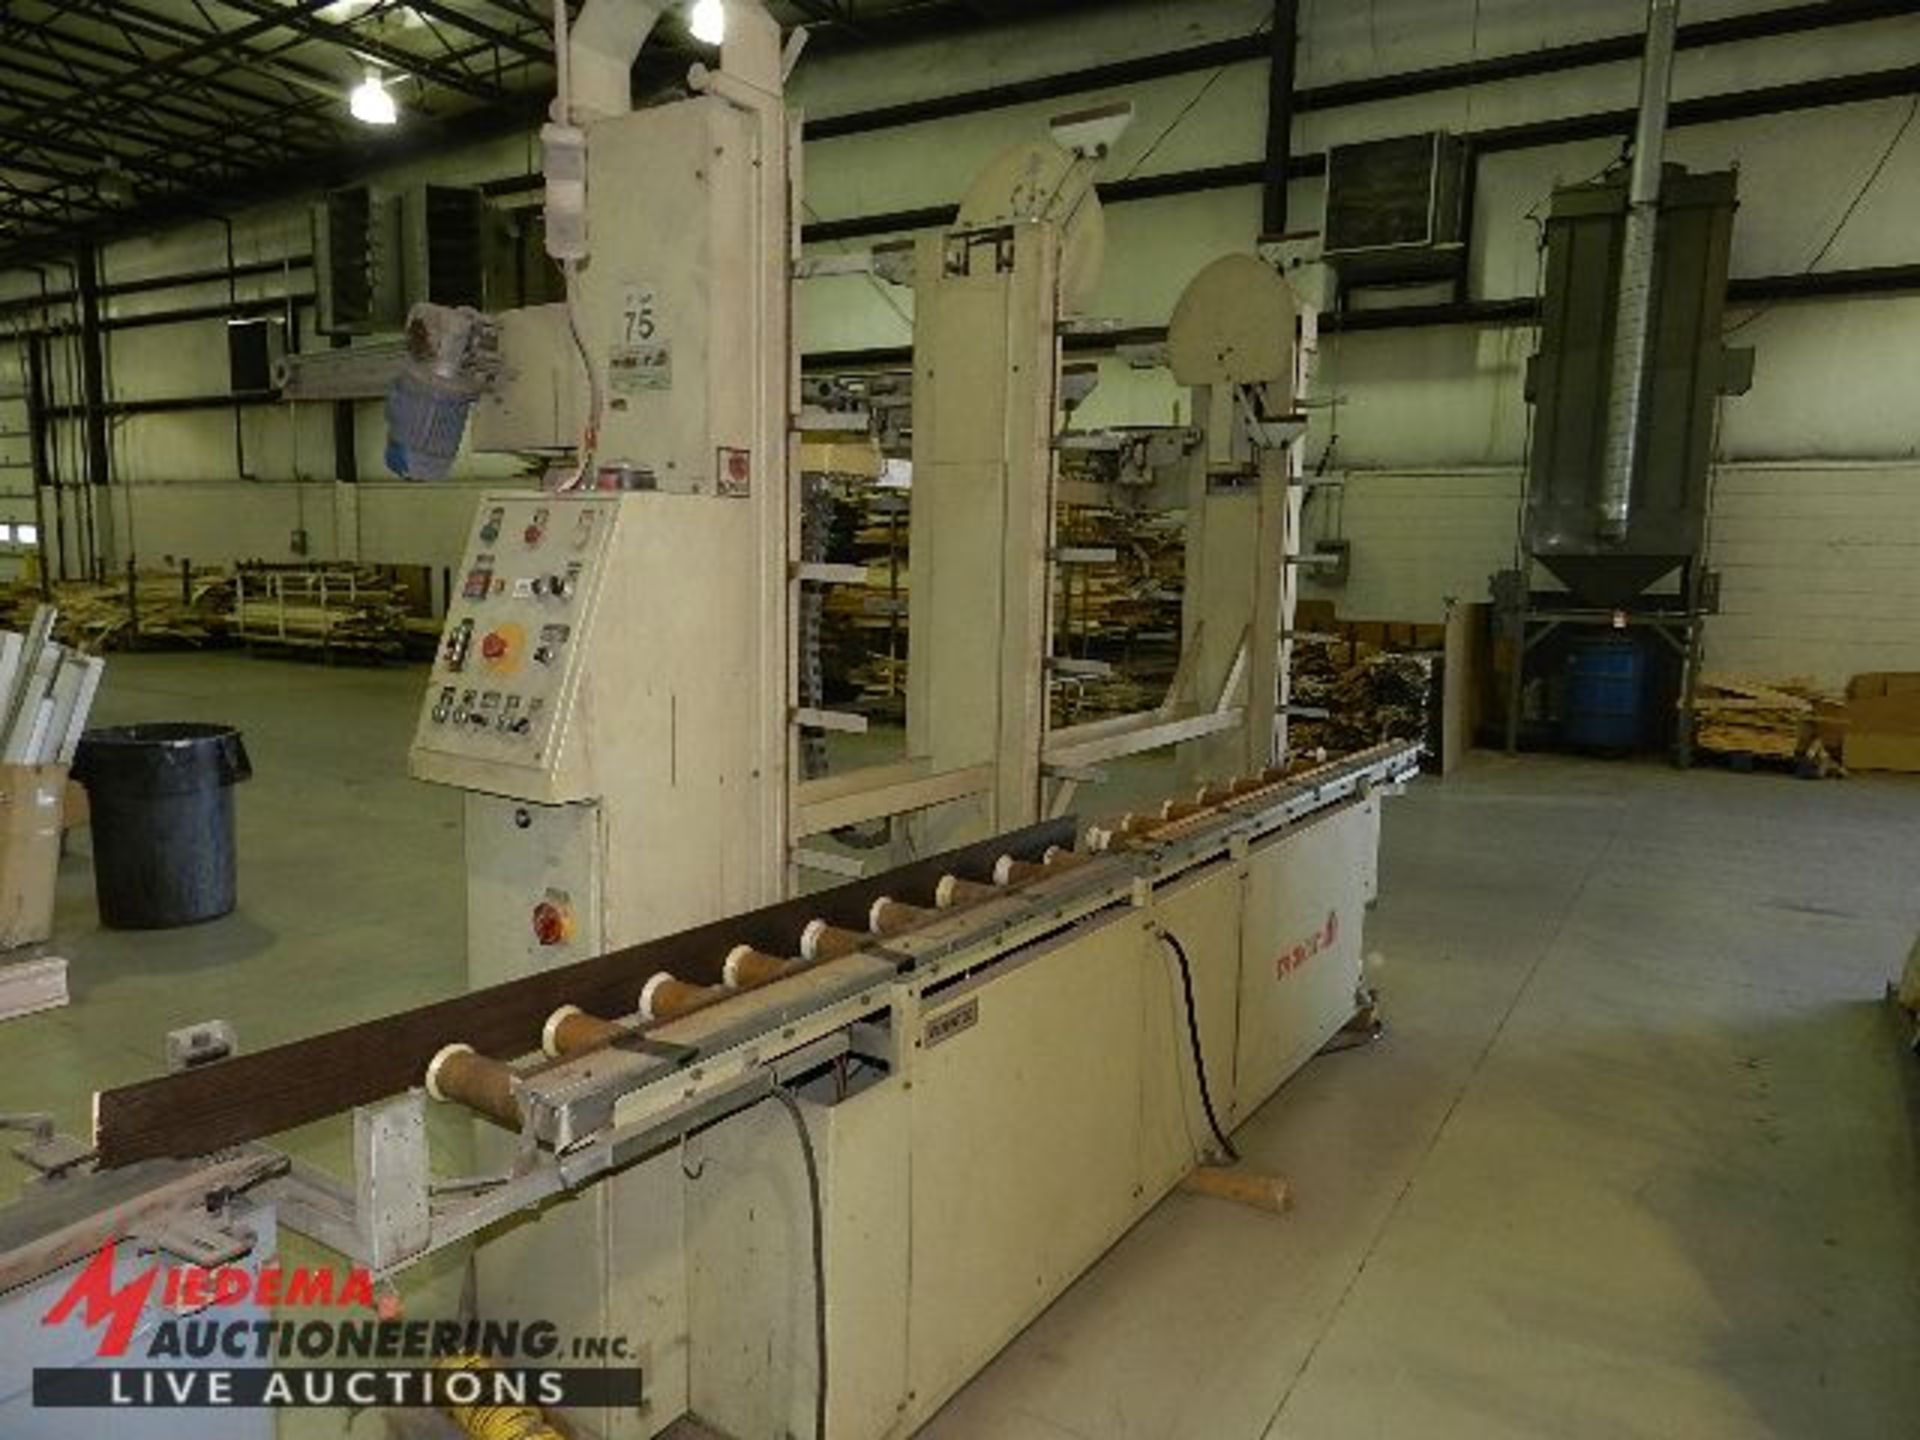 MAKOR AC-A3R MATERIAL STACKER, 1995, 3 POST, 48" STACKING ARMS, 9" ROLLER FEEDER CONVEYOR, S/N 5107 - Image 4 of 5